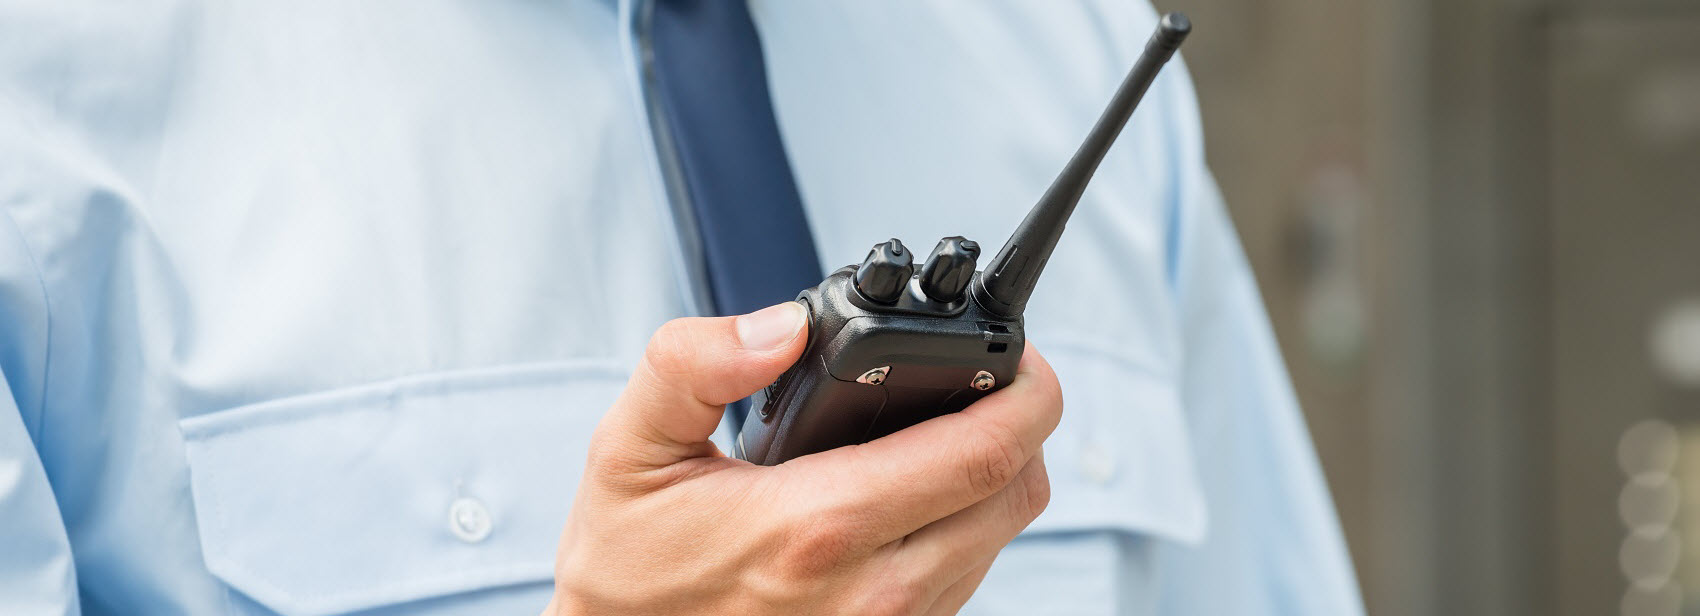 Two-Way Radios for Sale Chester County PA